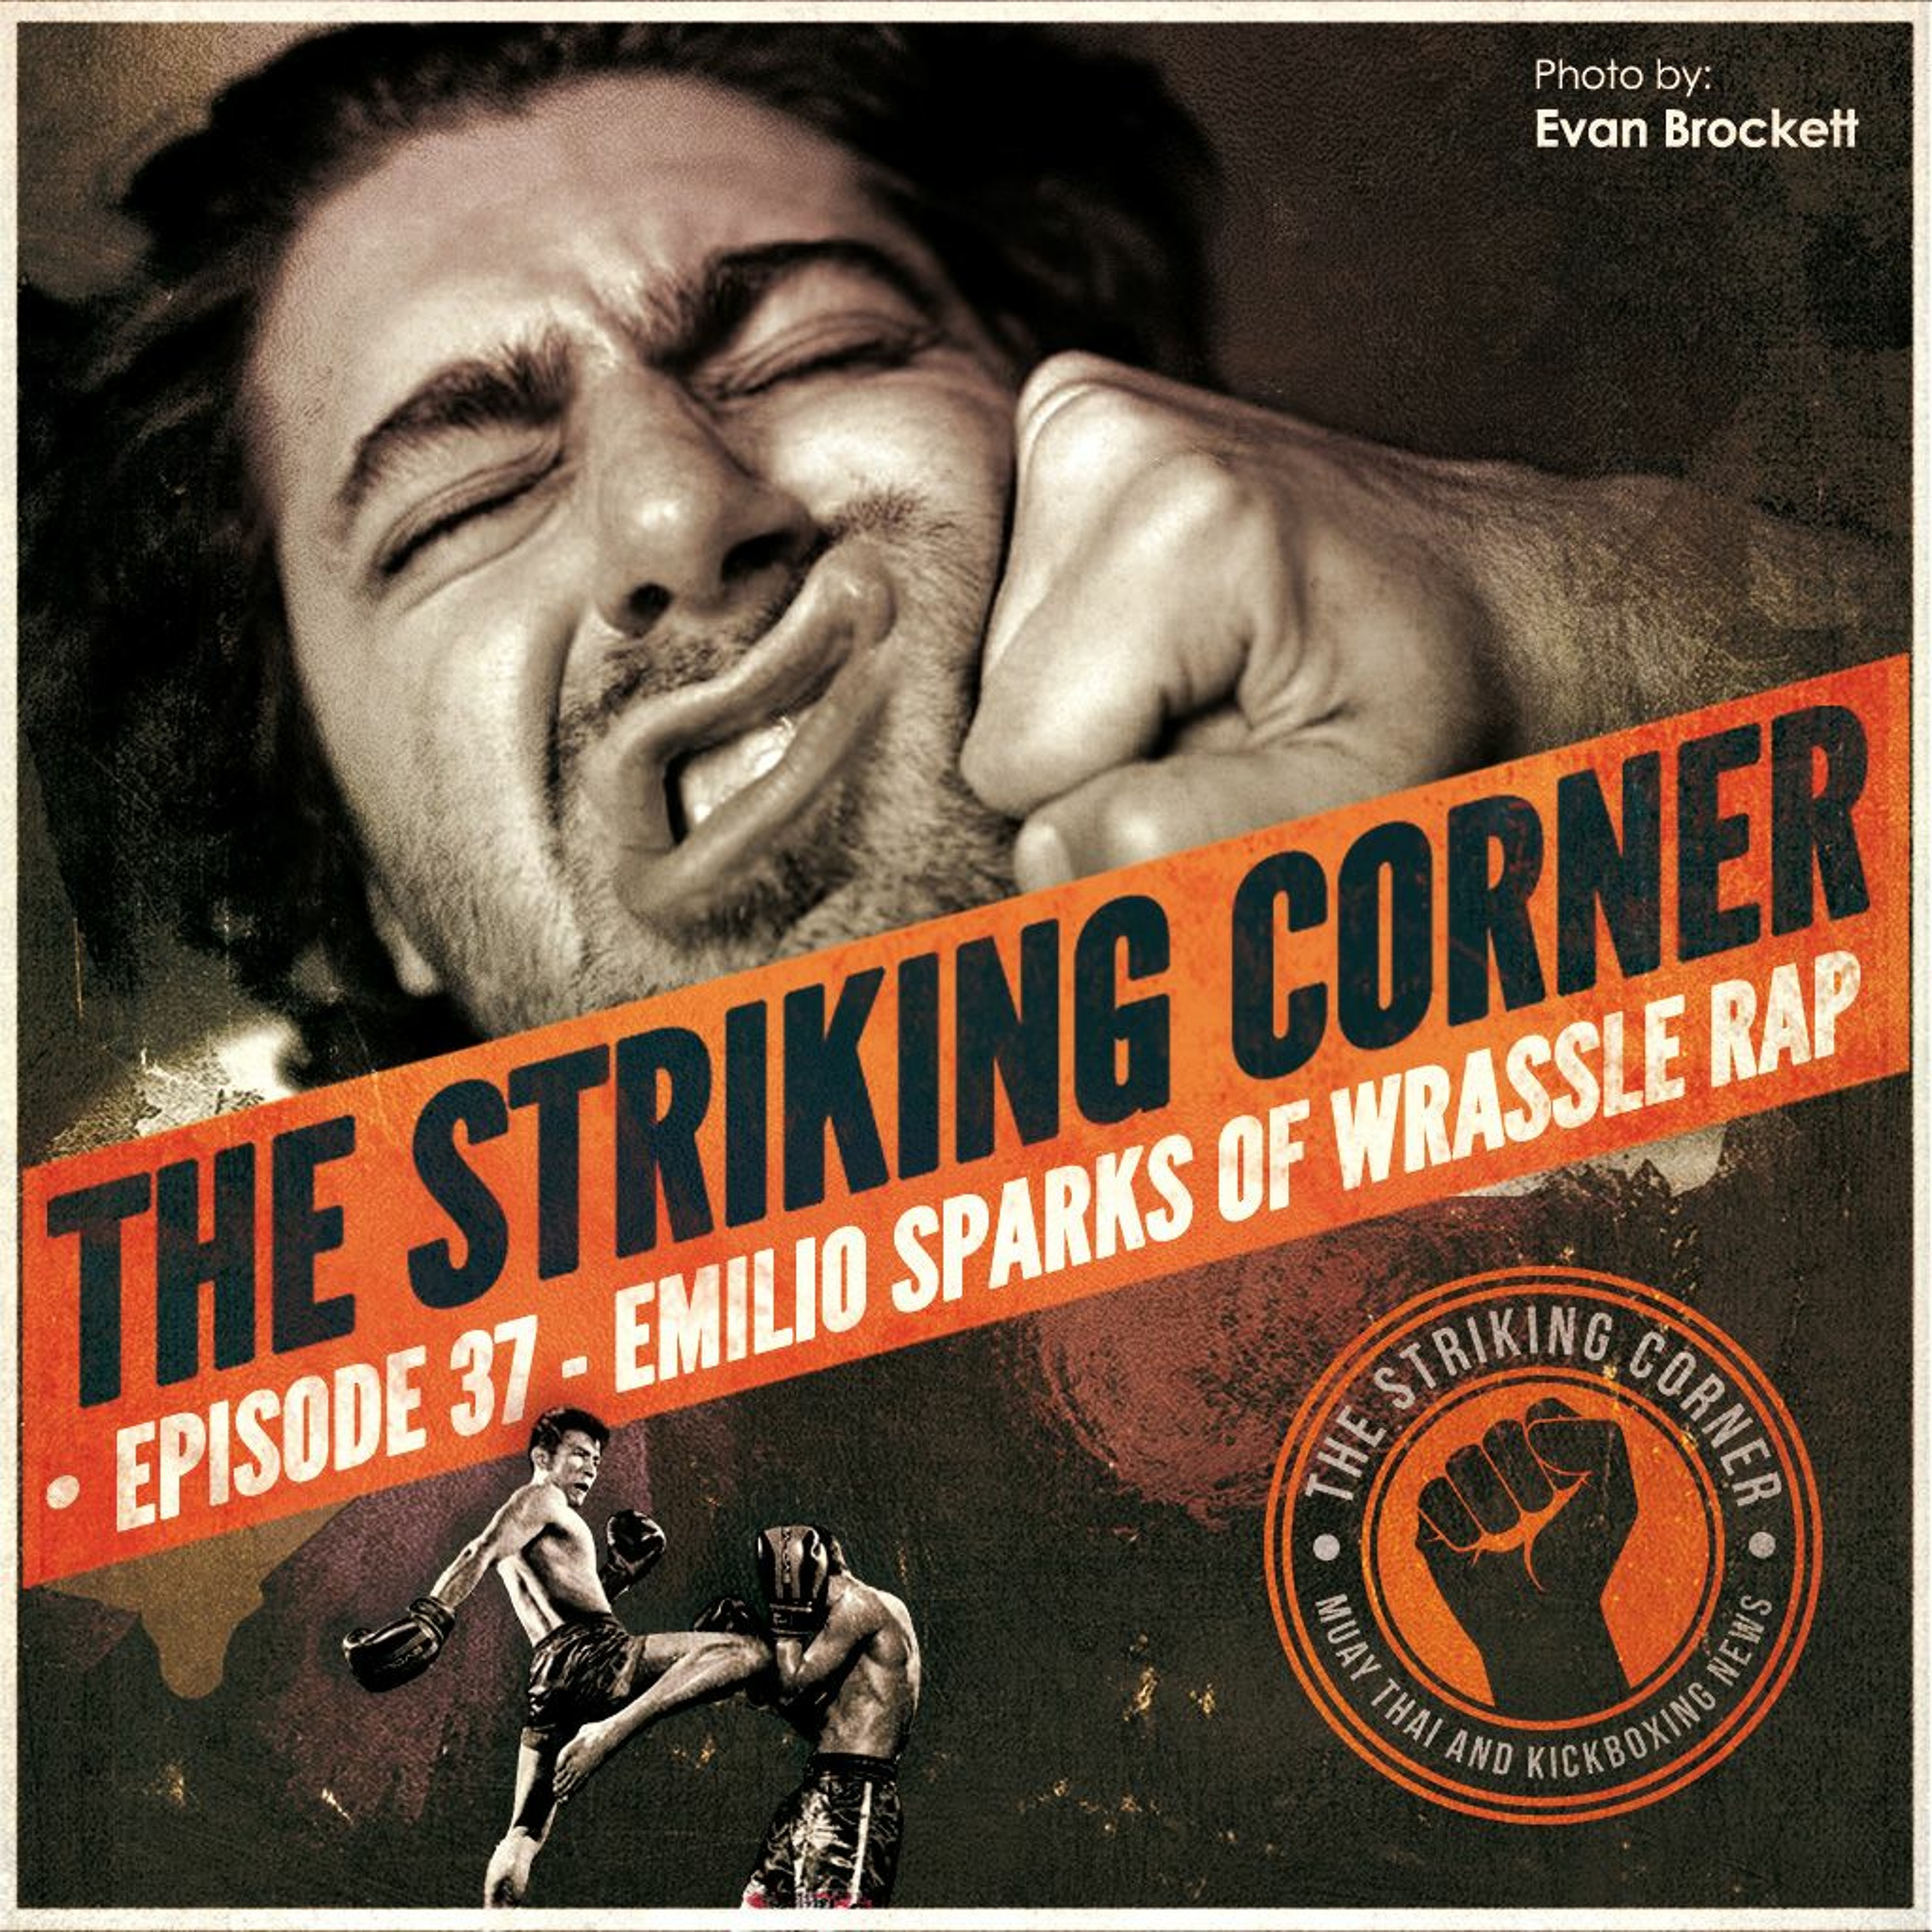 Ep. 37 feat. Emilio Sparks from The Wrassle Rap Podcast